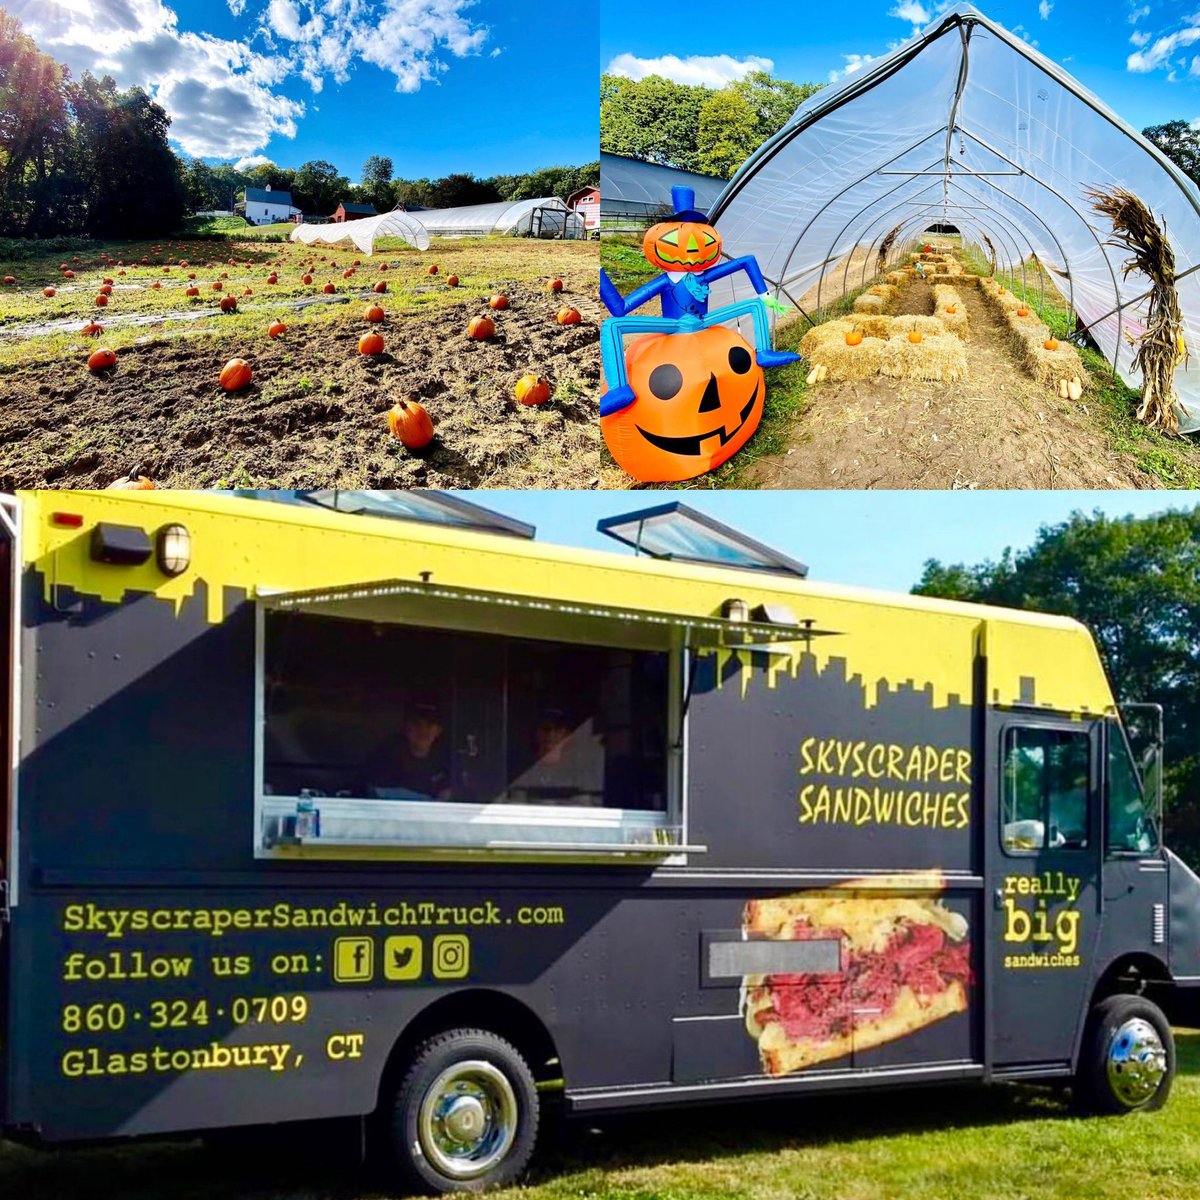 Sunday Funday is here and we’ll be at Tonn’s Marketplace in #BurlingtonCT 11a-5p! 🎃🥪 Come pick your own pumpkins, make your way through the hay maze, and work up an appetite for Skyscraper Sandwiches 😋 #fallfun

#ReallyBigSandwiches #CTfoodtrucks #CTfood #CTeats #CT